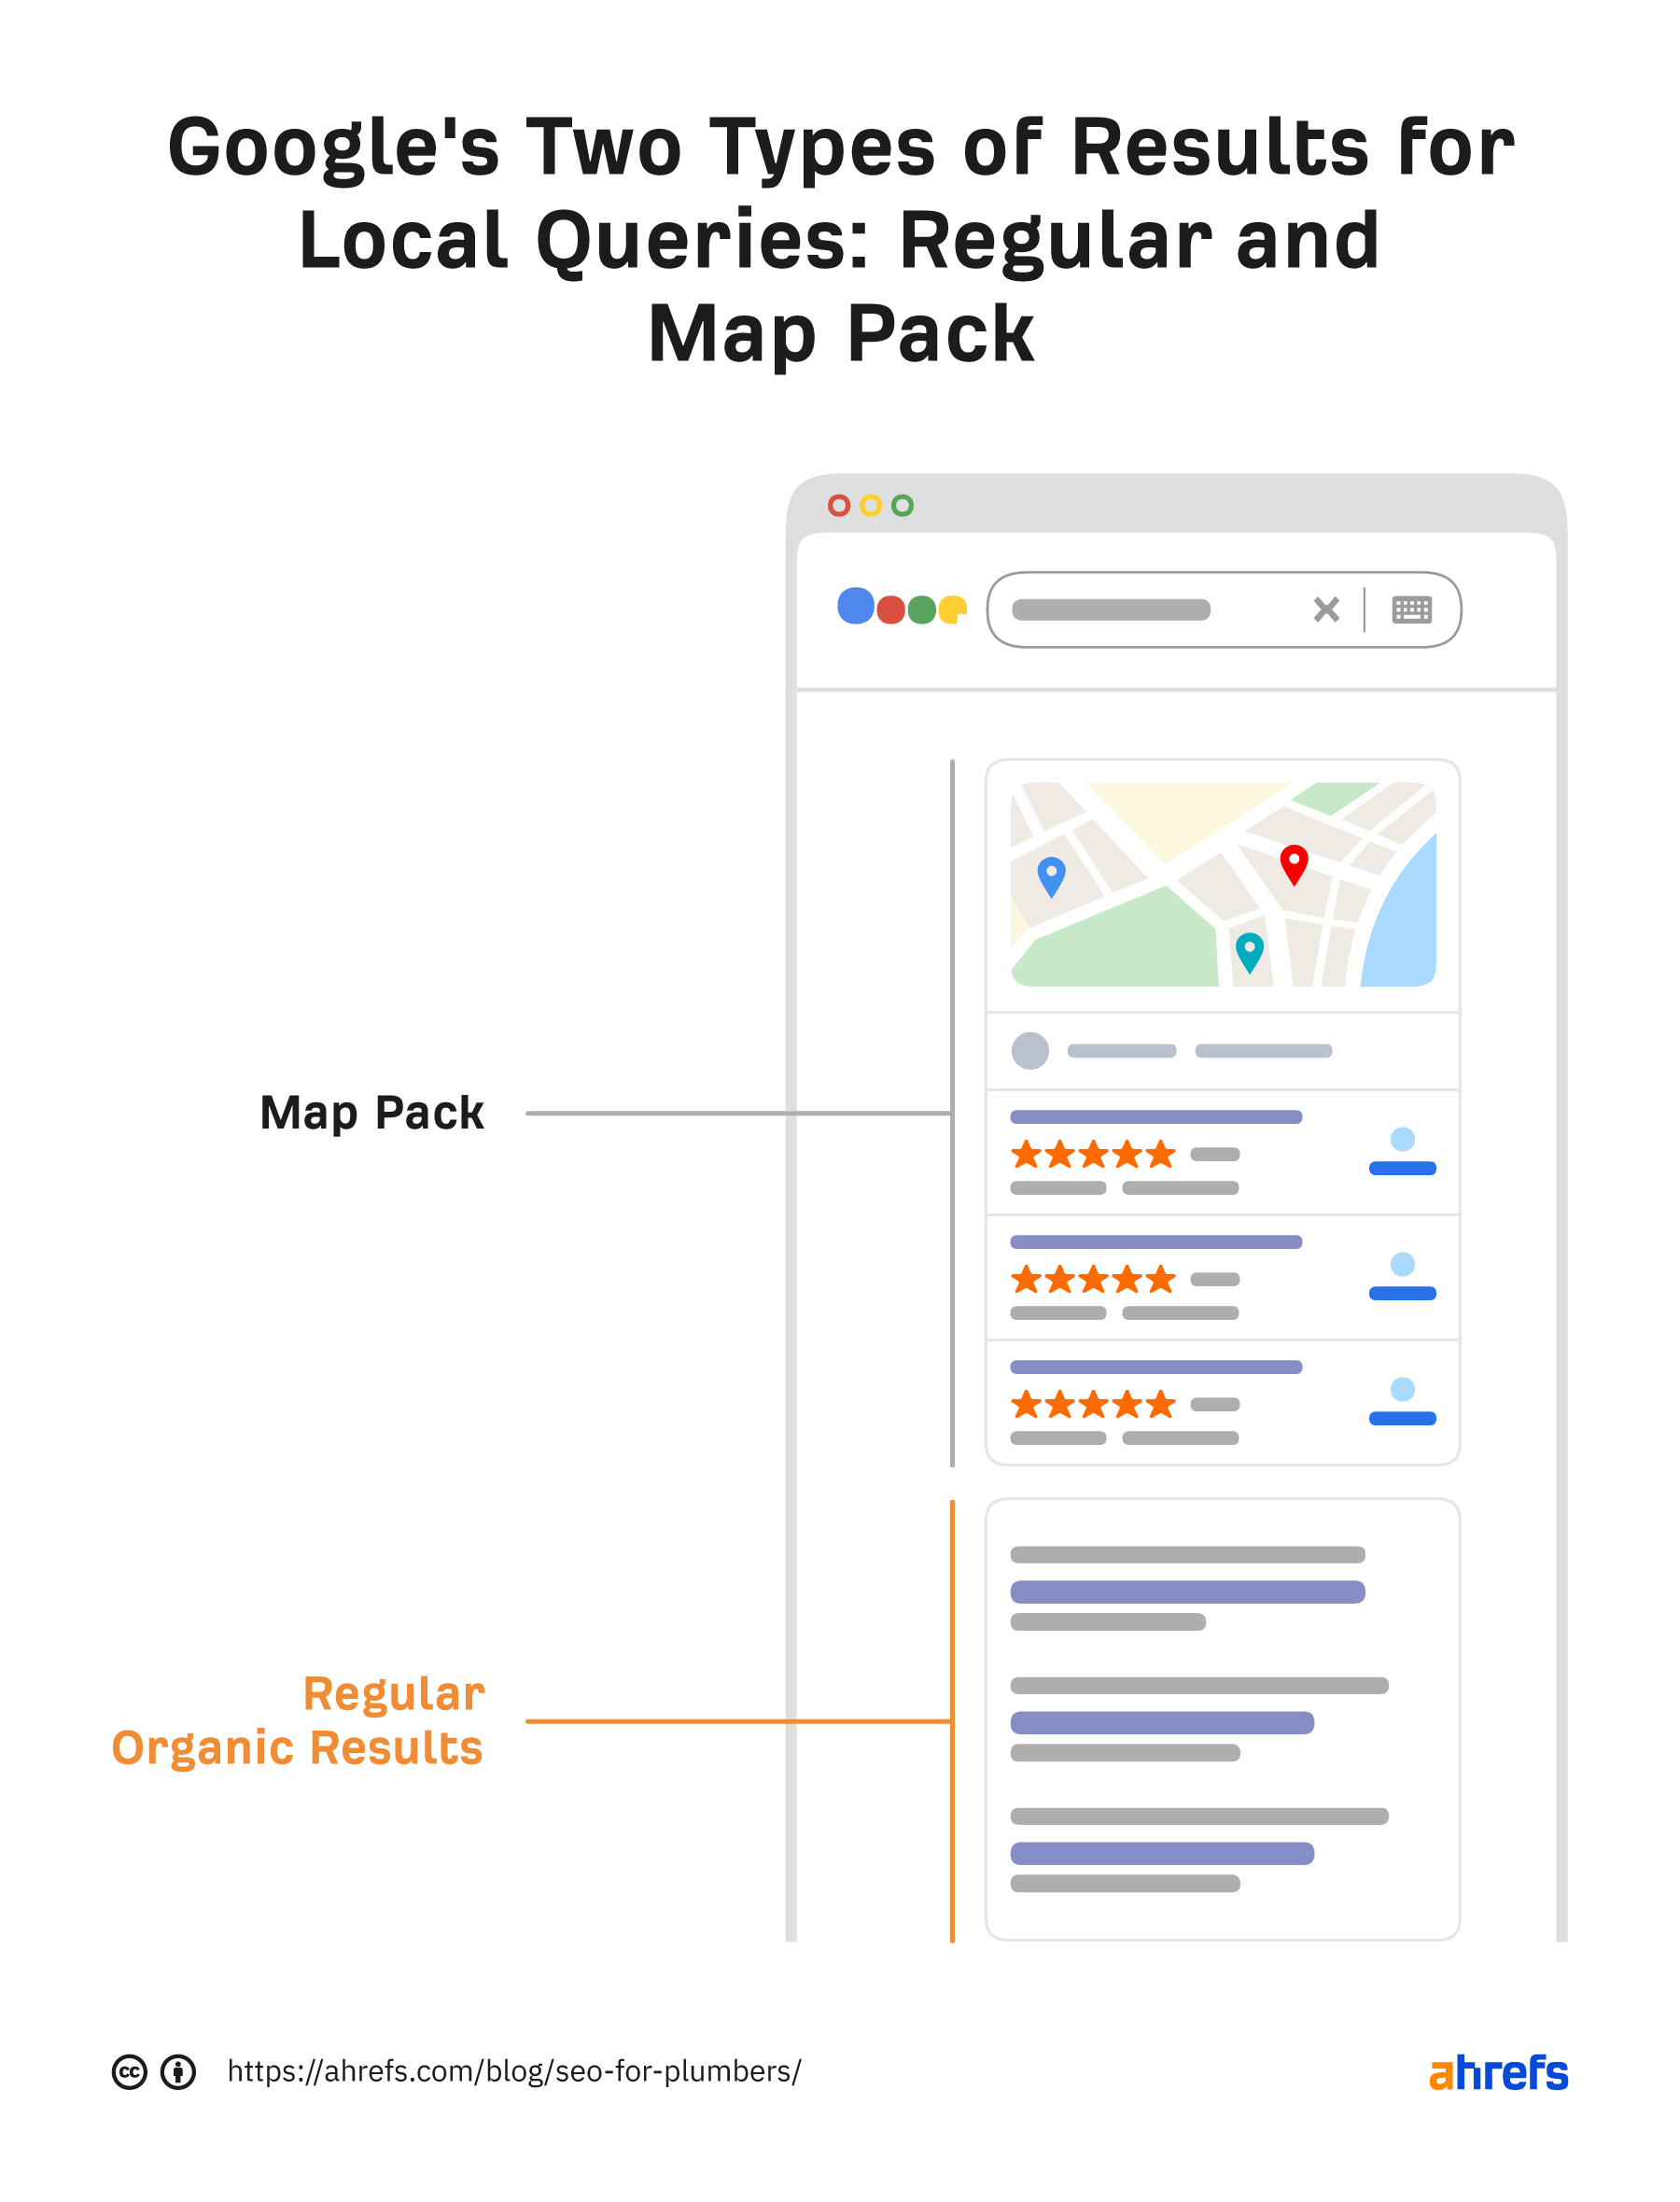 Google's two types of results for local queries: regular and map pack
